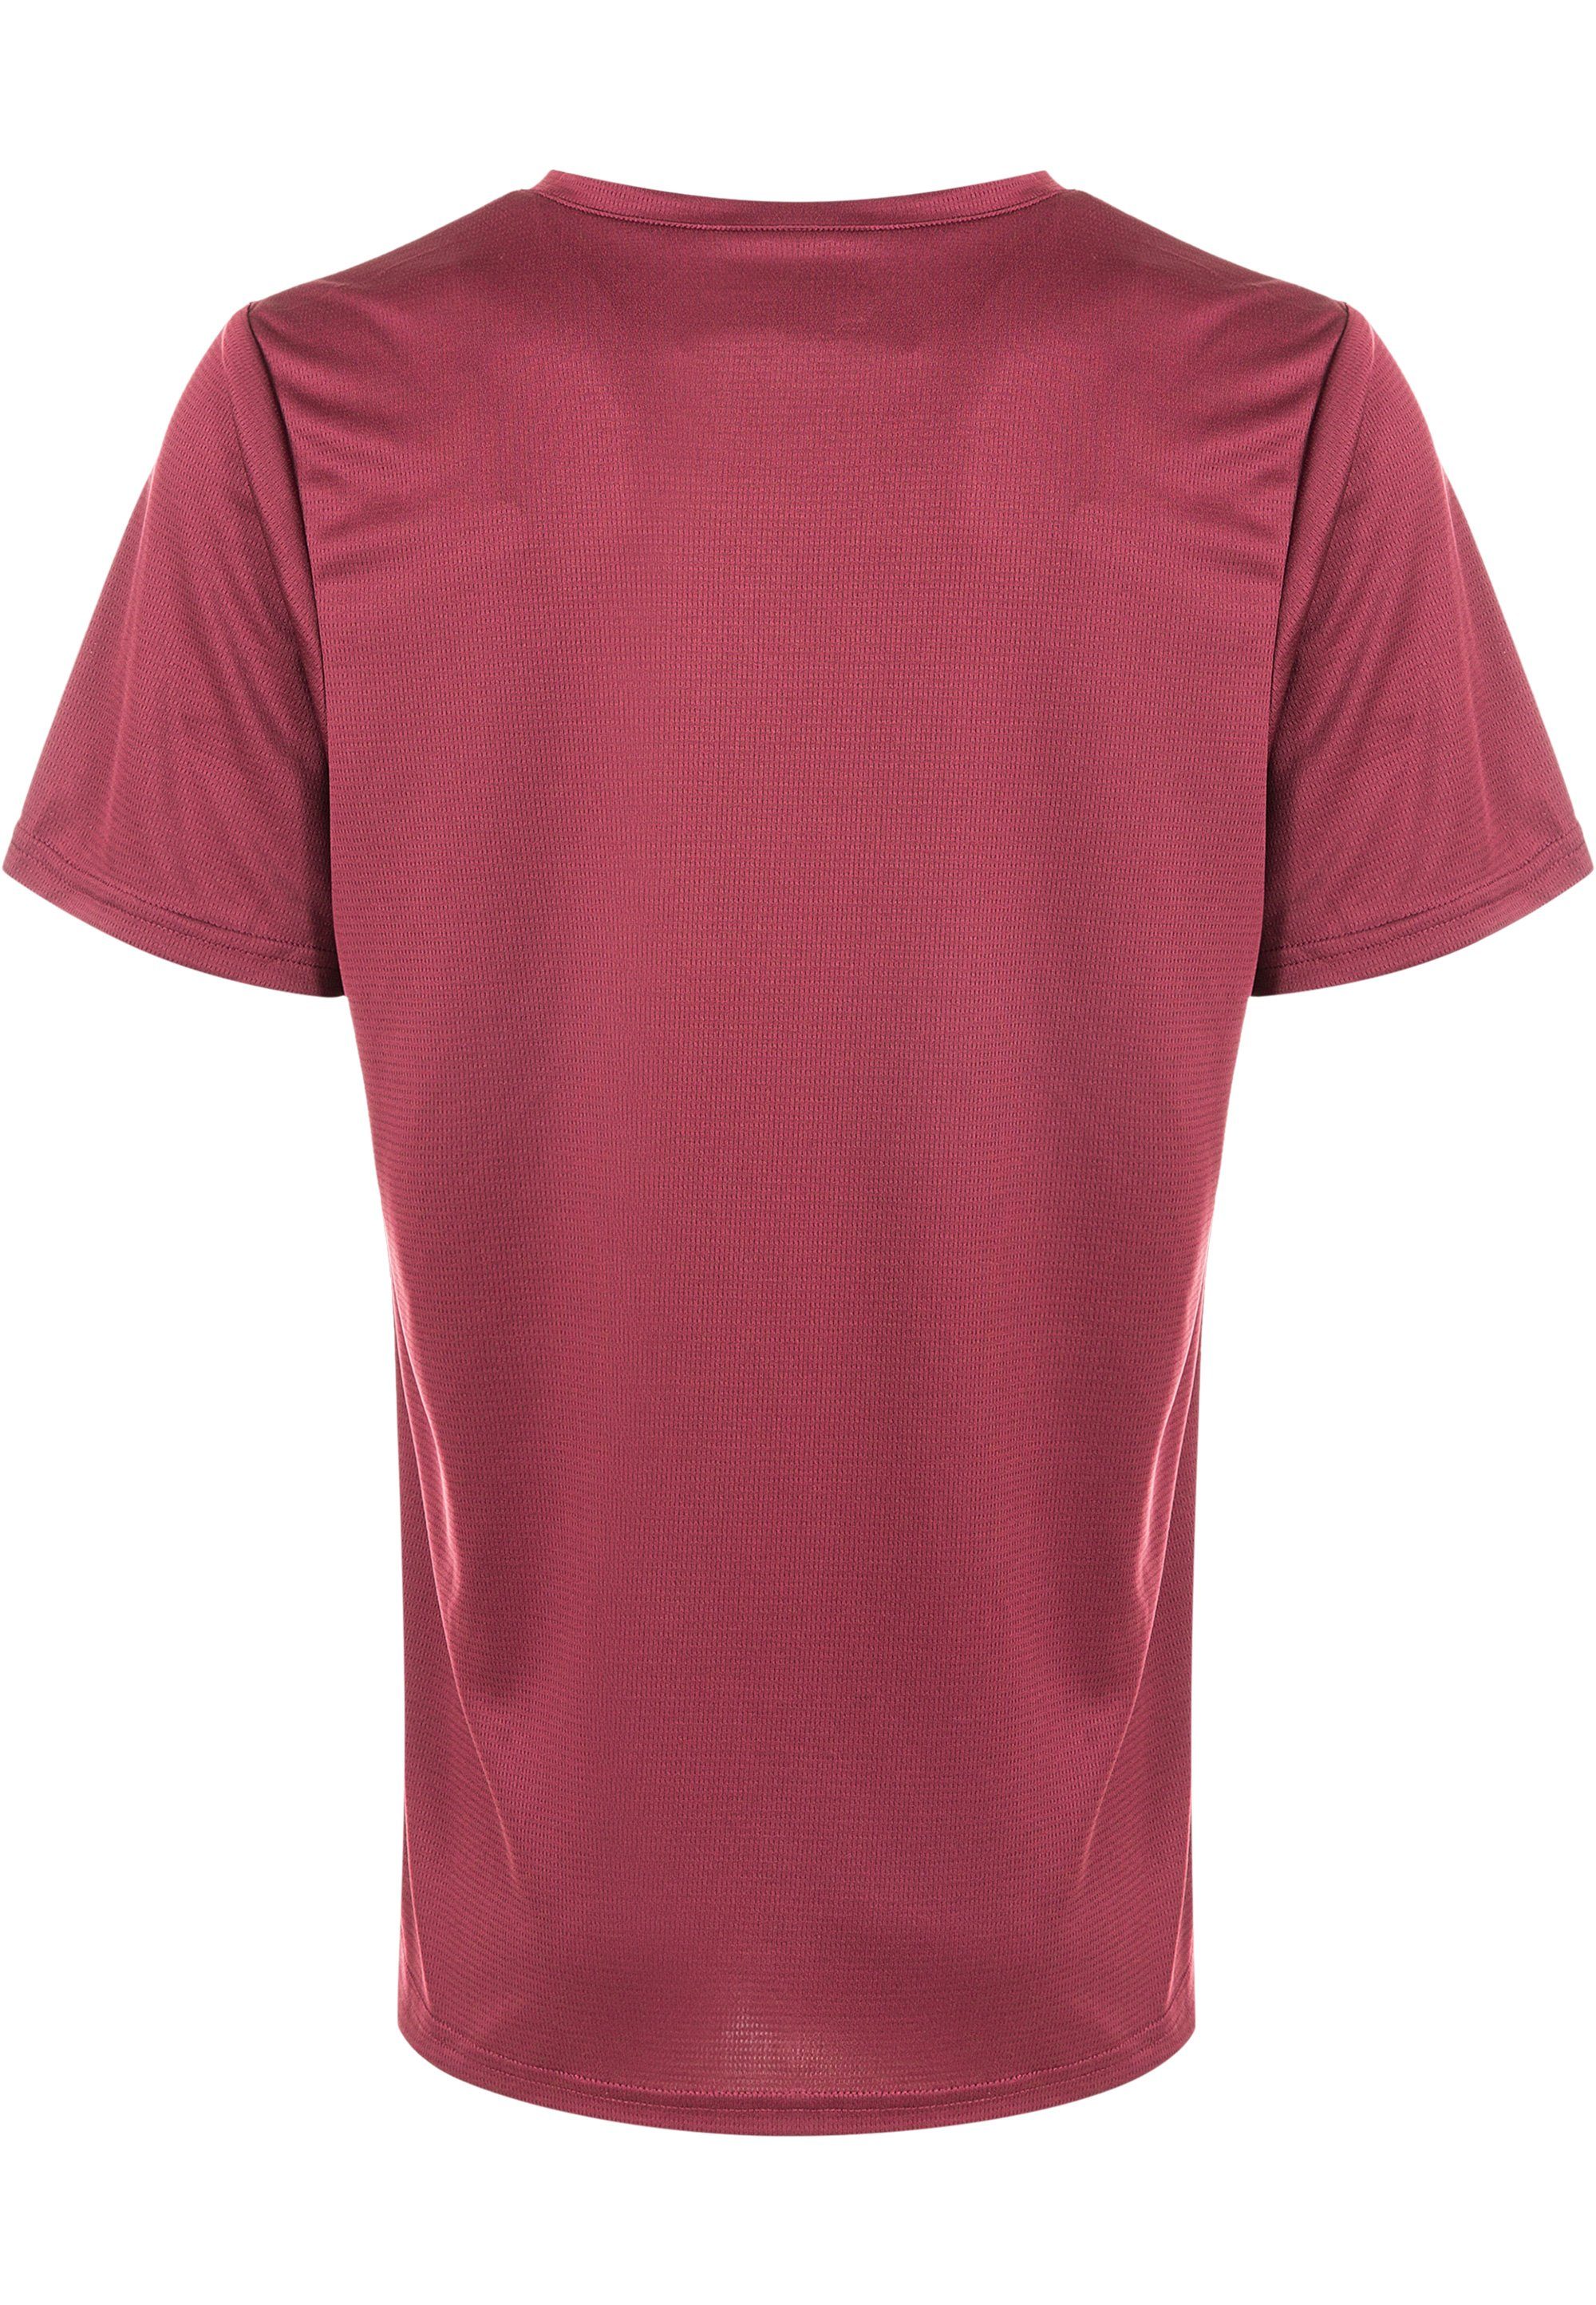 Q by Endurance ANNABELLE QUICK mit DRY-Technologie Funktionsshirt (1-tlg) rot